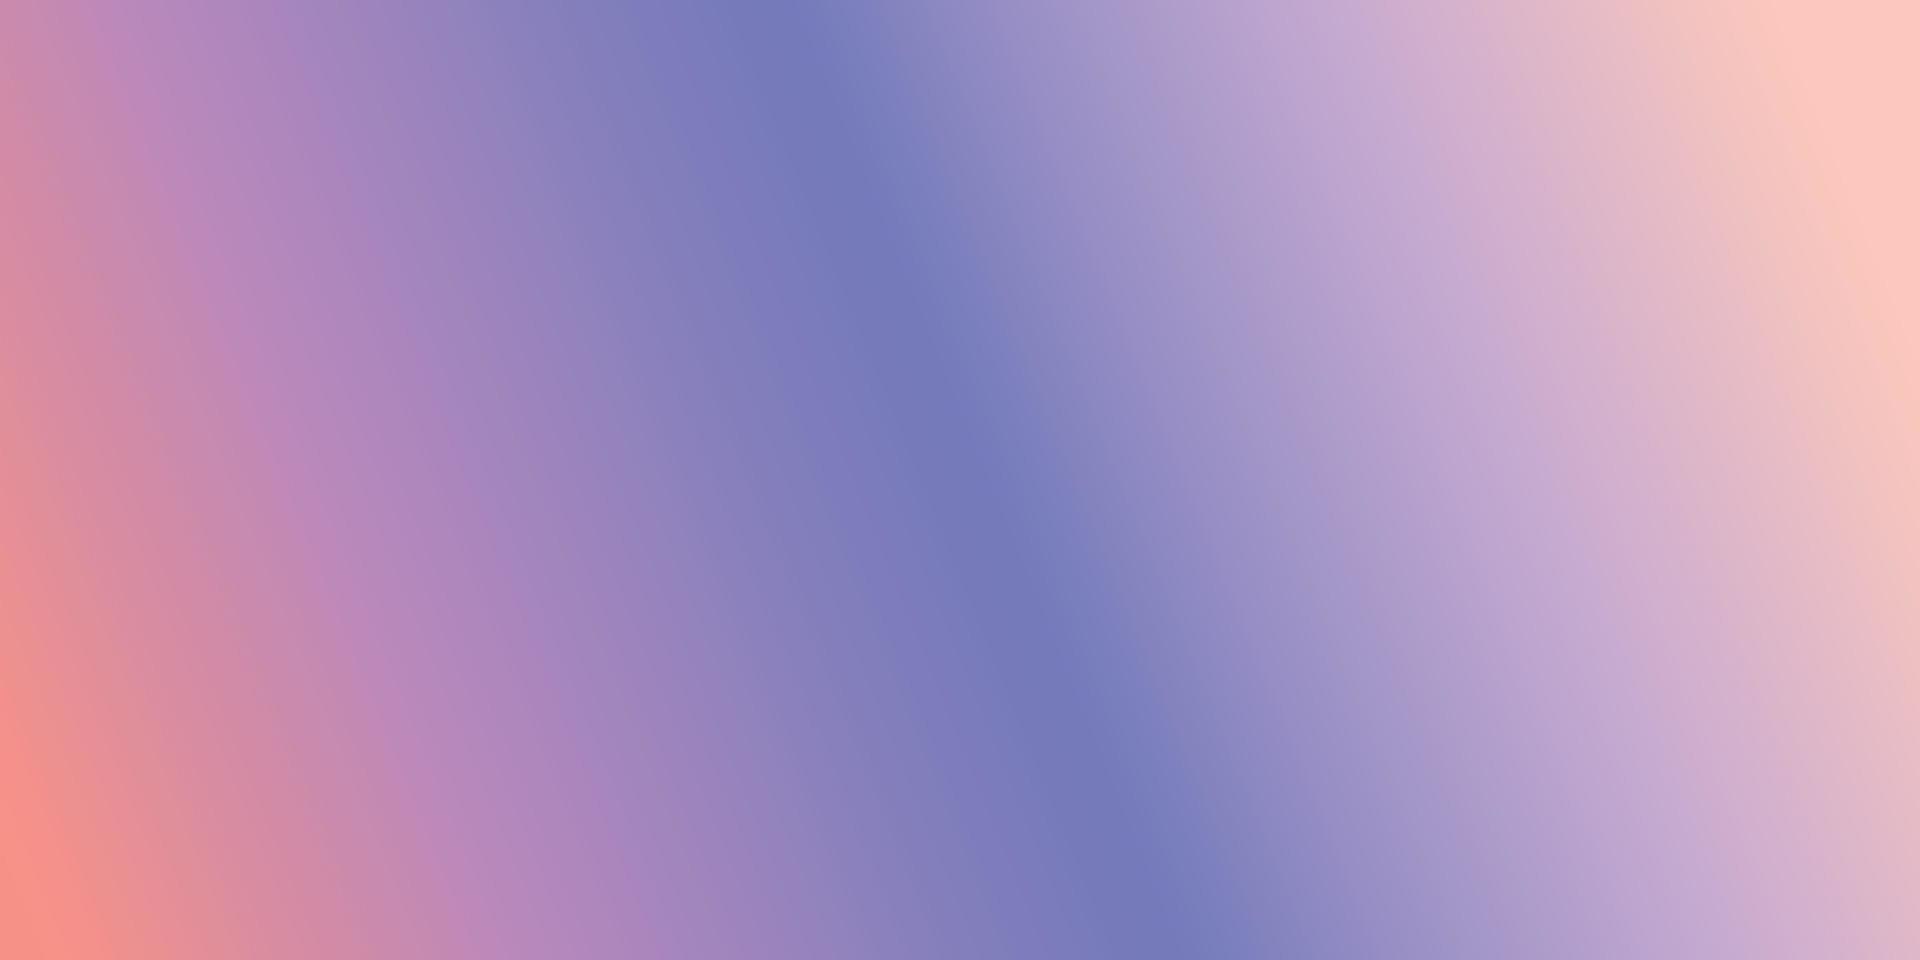 vector abstract background with soft color gradient